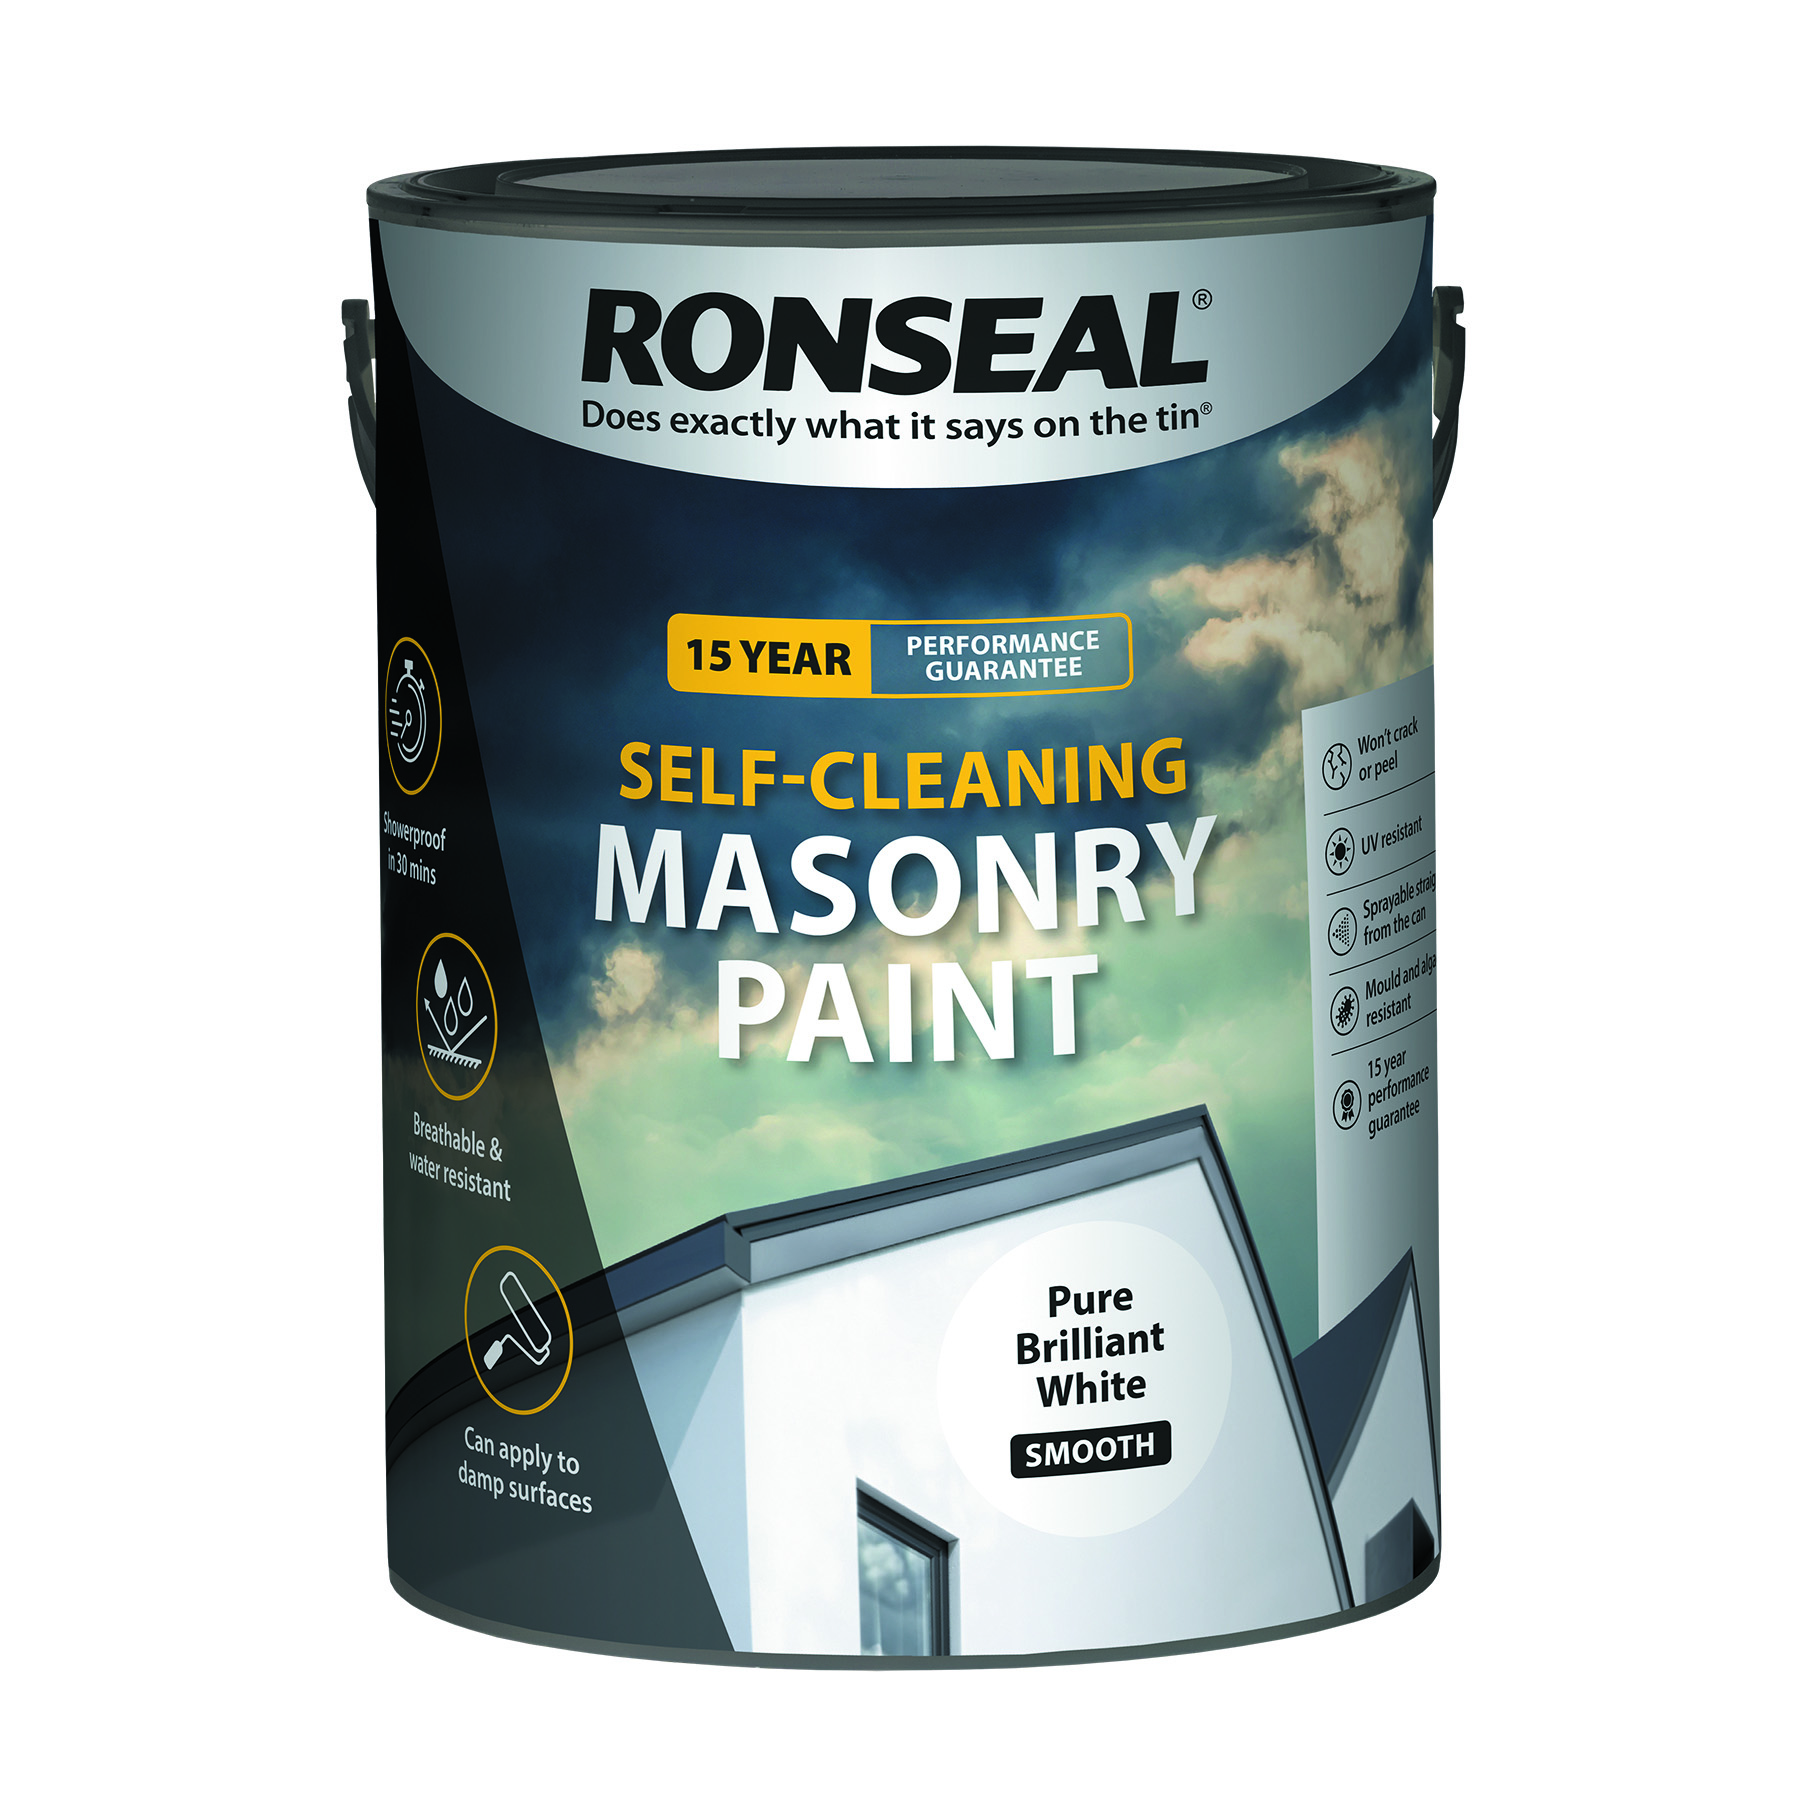 Ronseal Self-cleaning Masonry Paint